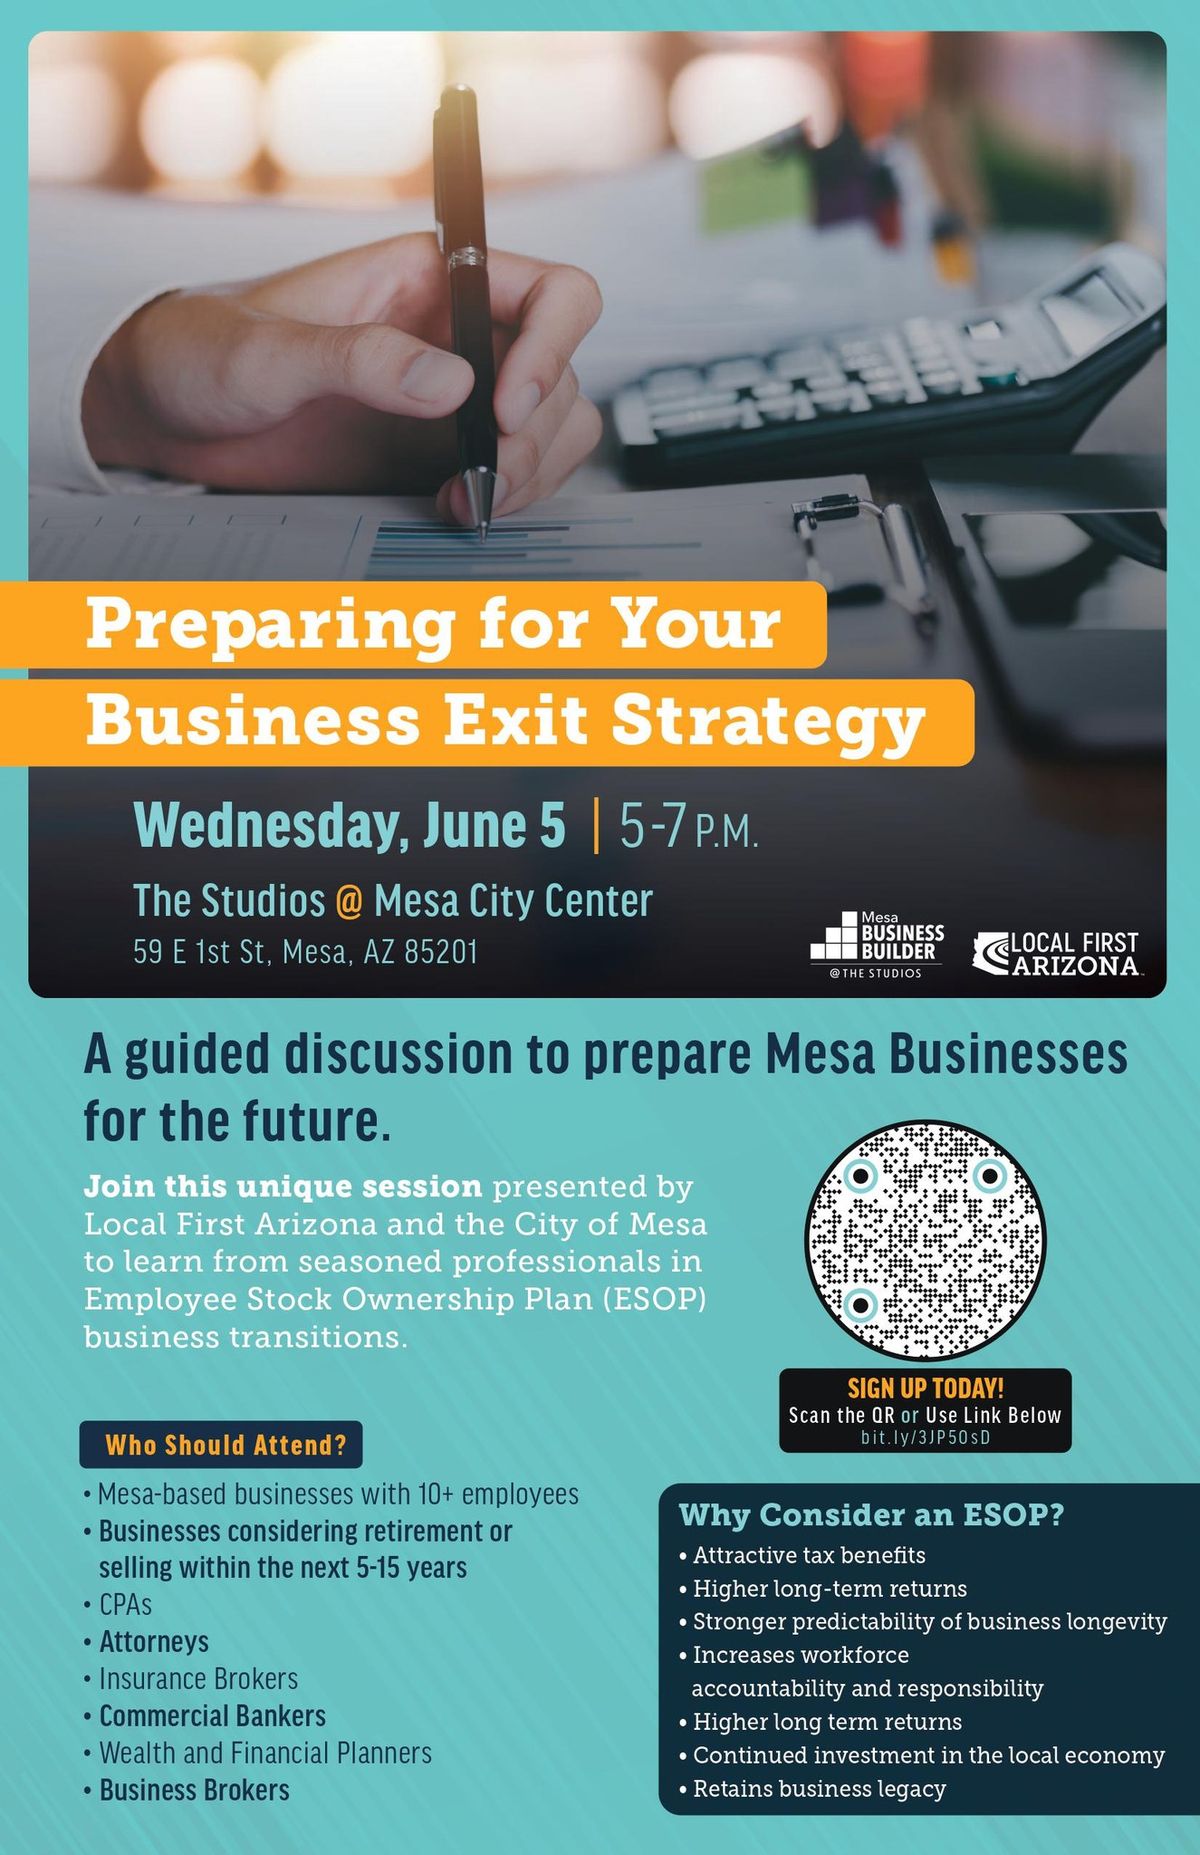 Preparing Your Business Exit Strategy